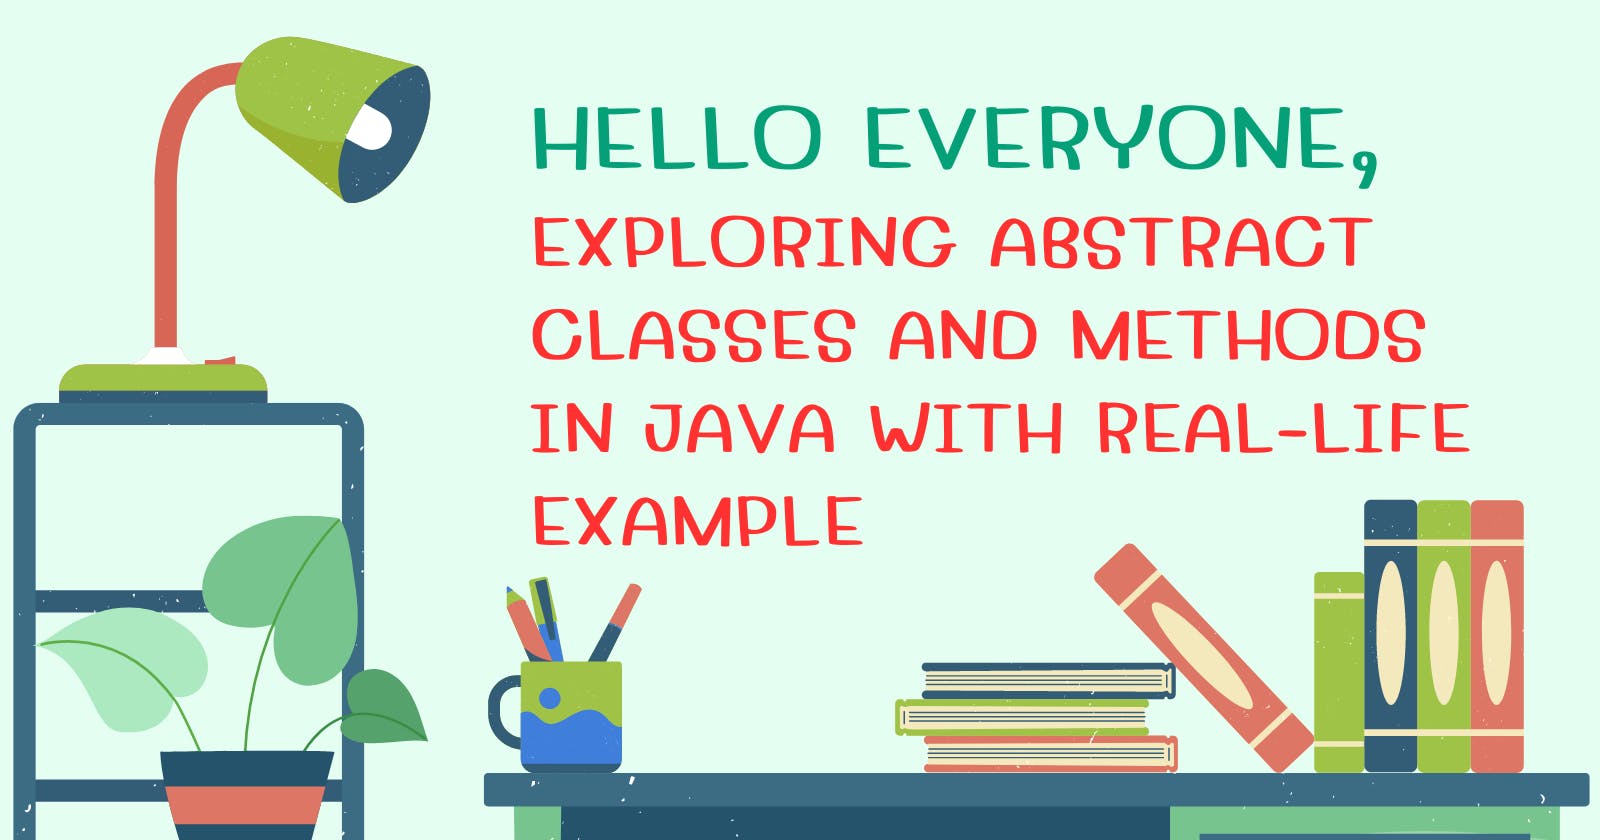 Exploring Abstract Classes and Methods in Java with Real-Life Example